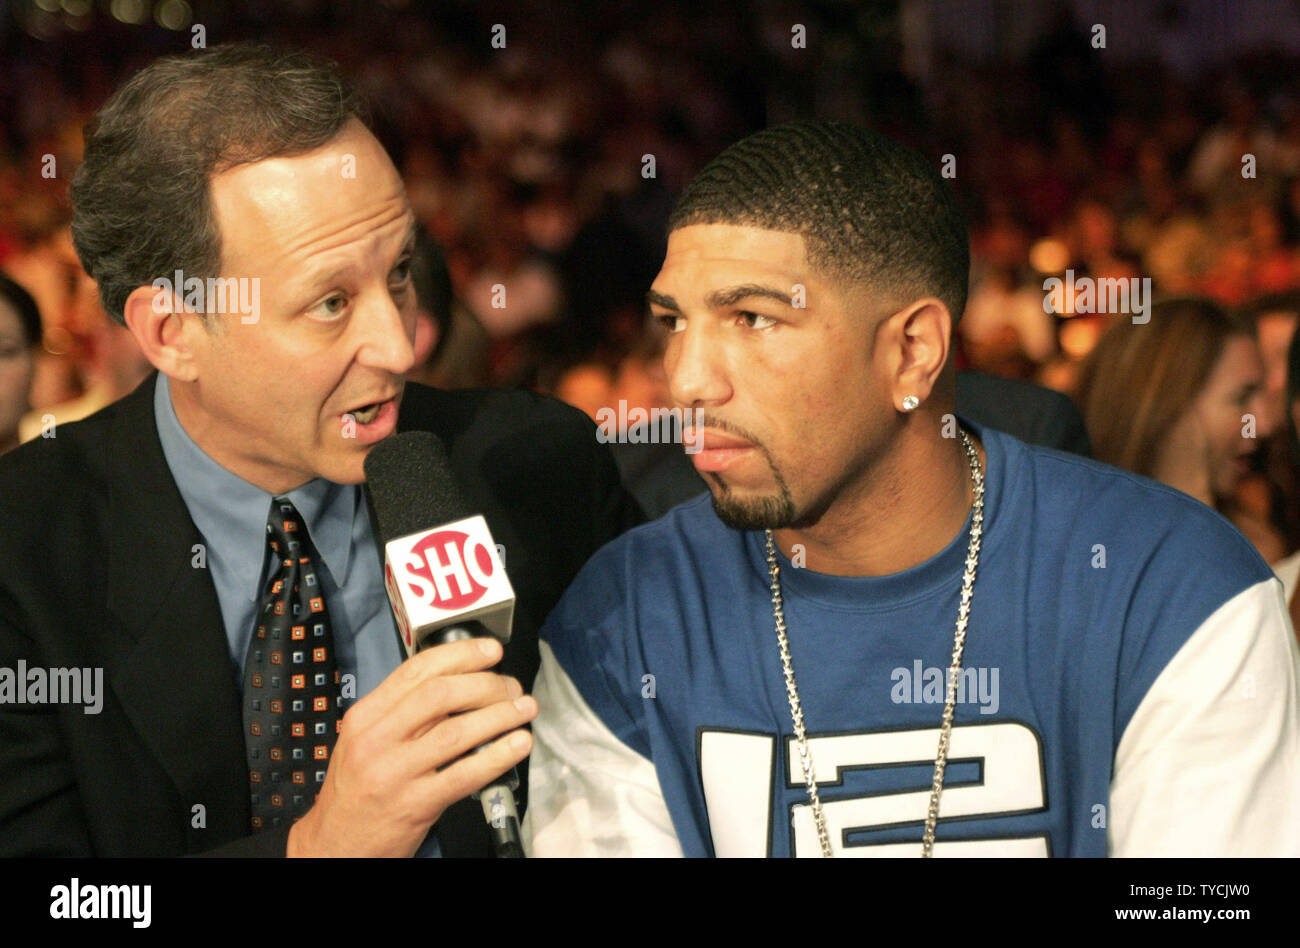 Showtime's Jim Grey interviewed the undisputed 154 pound champion Ronald 'Winky' Wright at the Wladimar Klitschko-DaVarryl Williamson heavyweight fight on Showtime at Caesars Palace in Las Vegas October 2, 2004. (UPI Photo/Roger Williams) Stock Photo